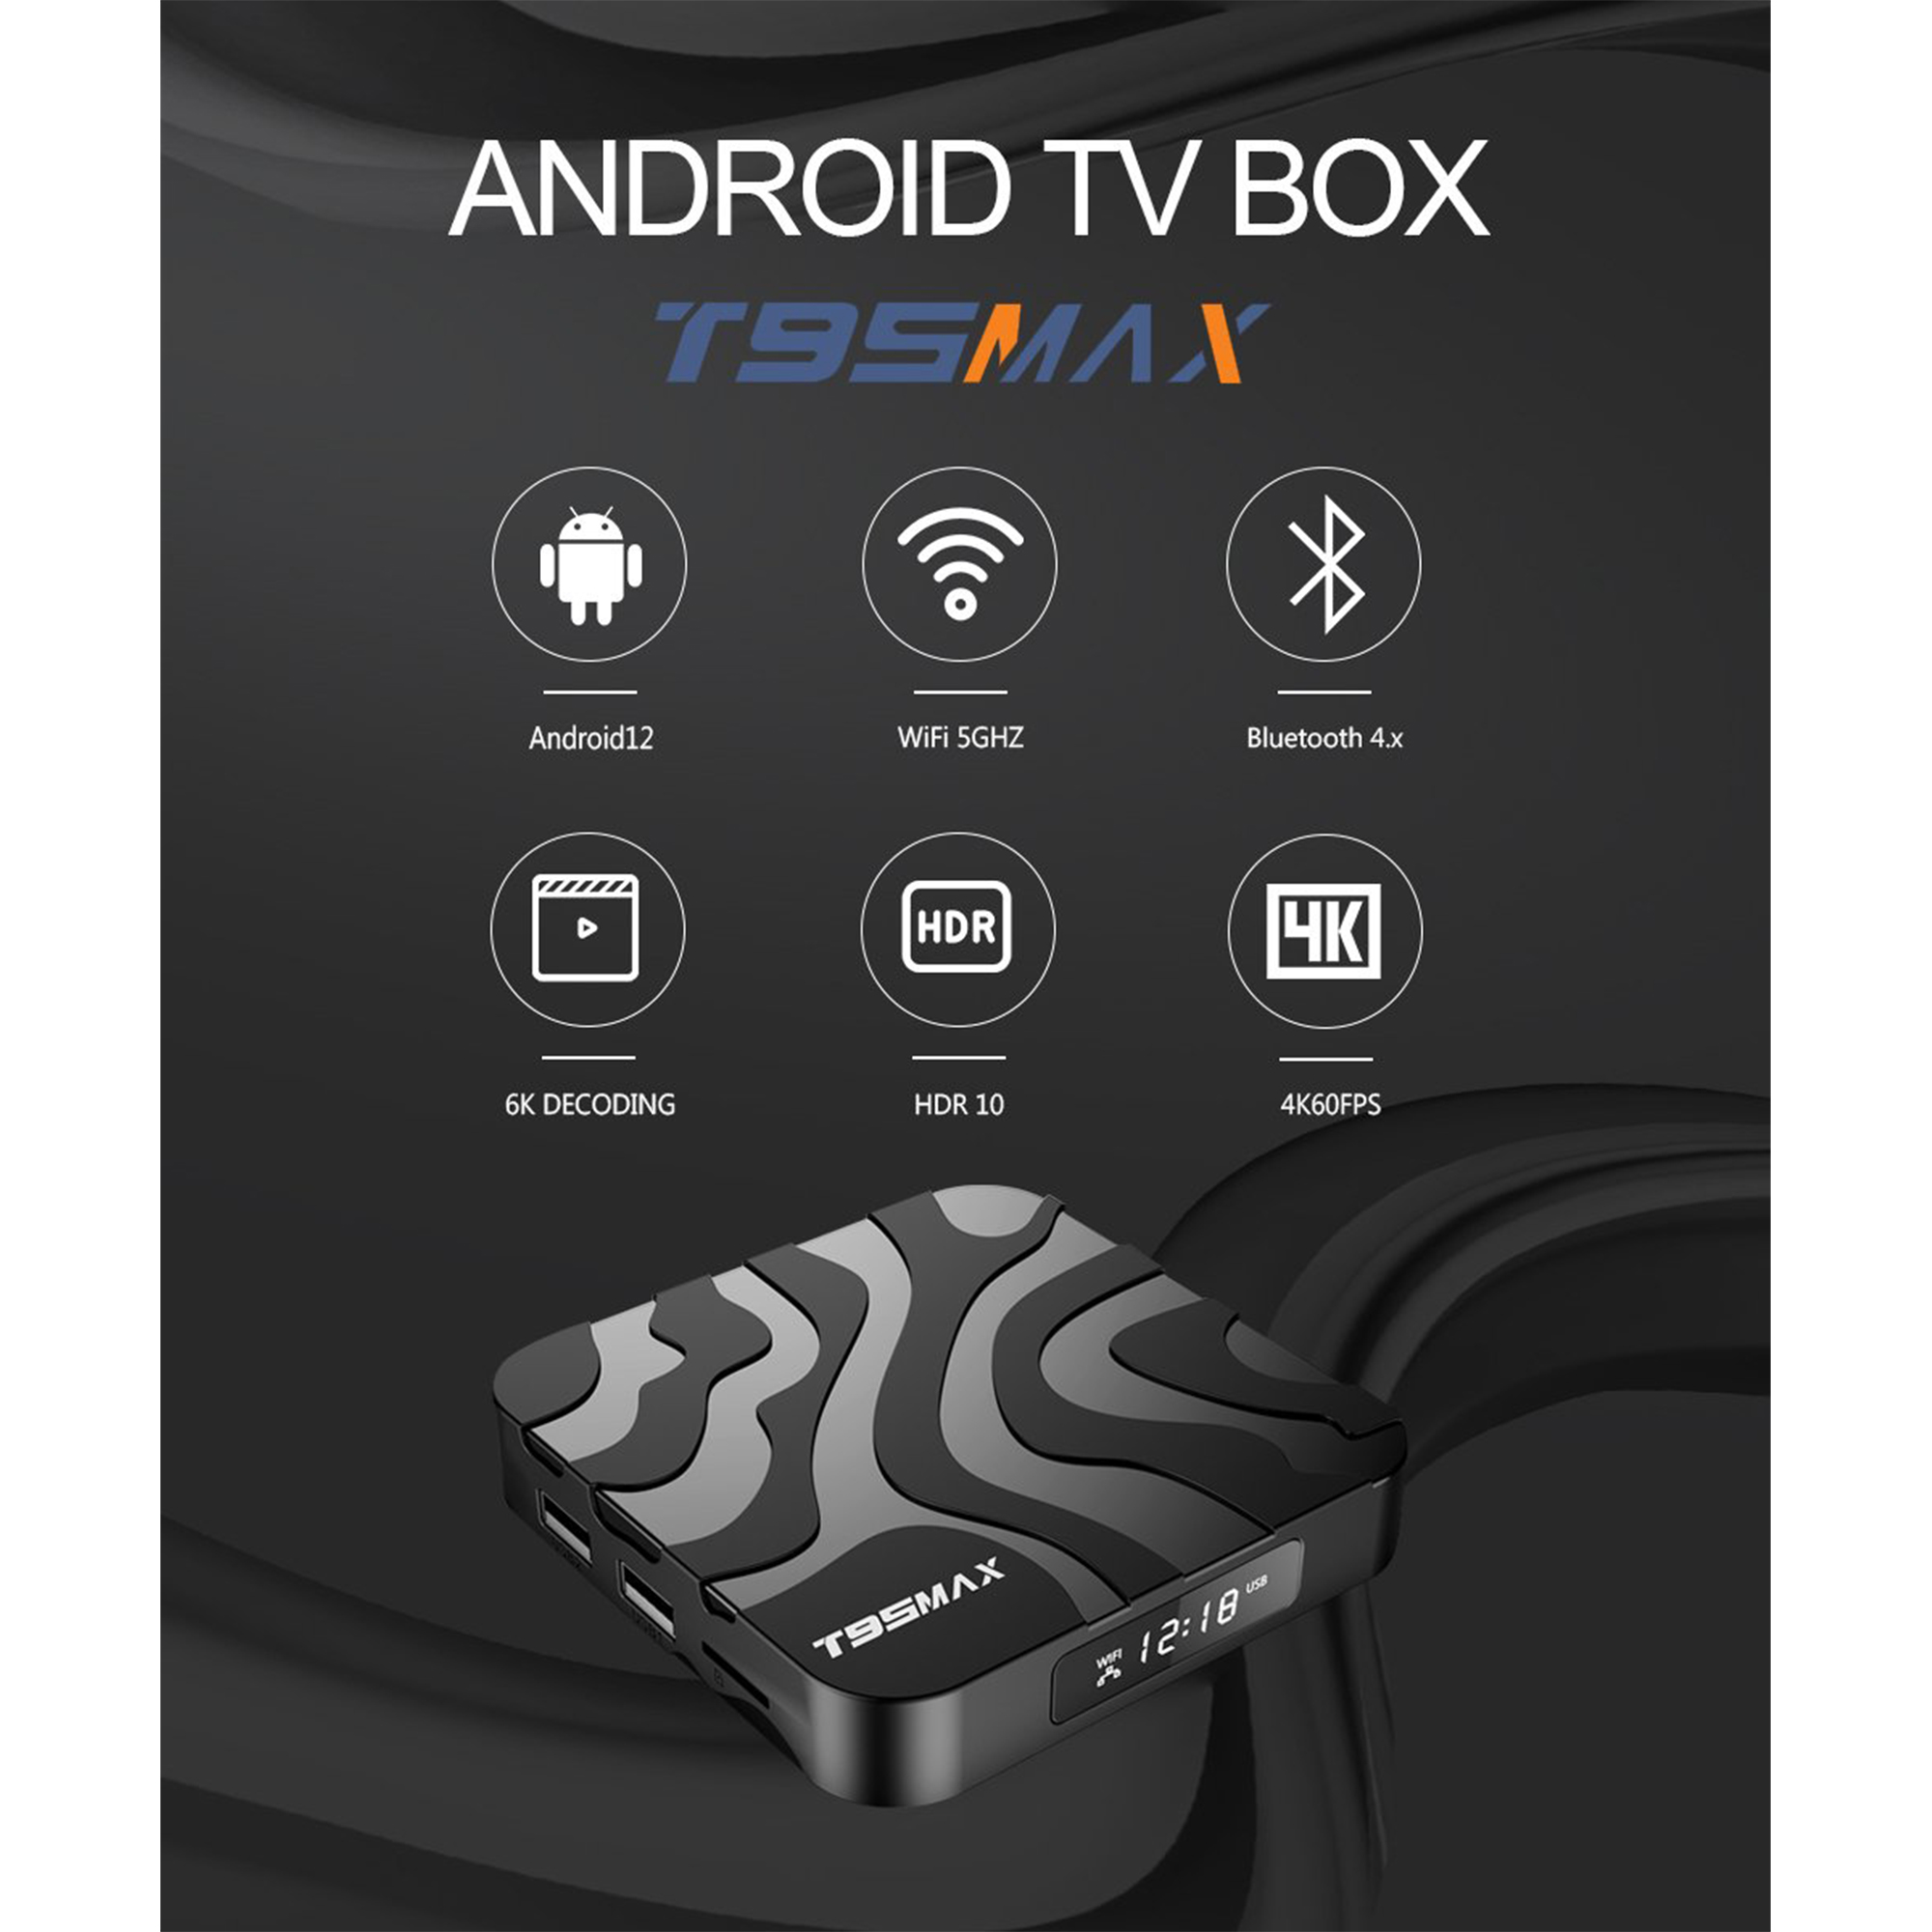 LIPA T95 Max Android Tv player, box 12 GB Black 16 Multimedia Android